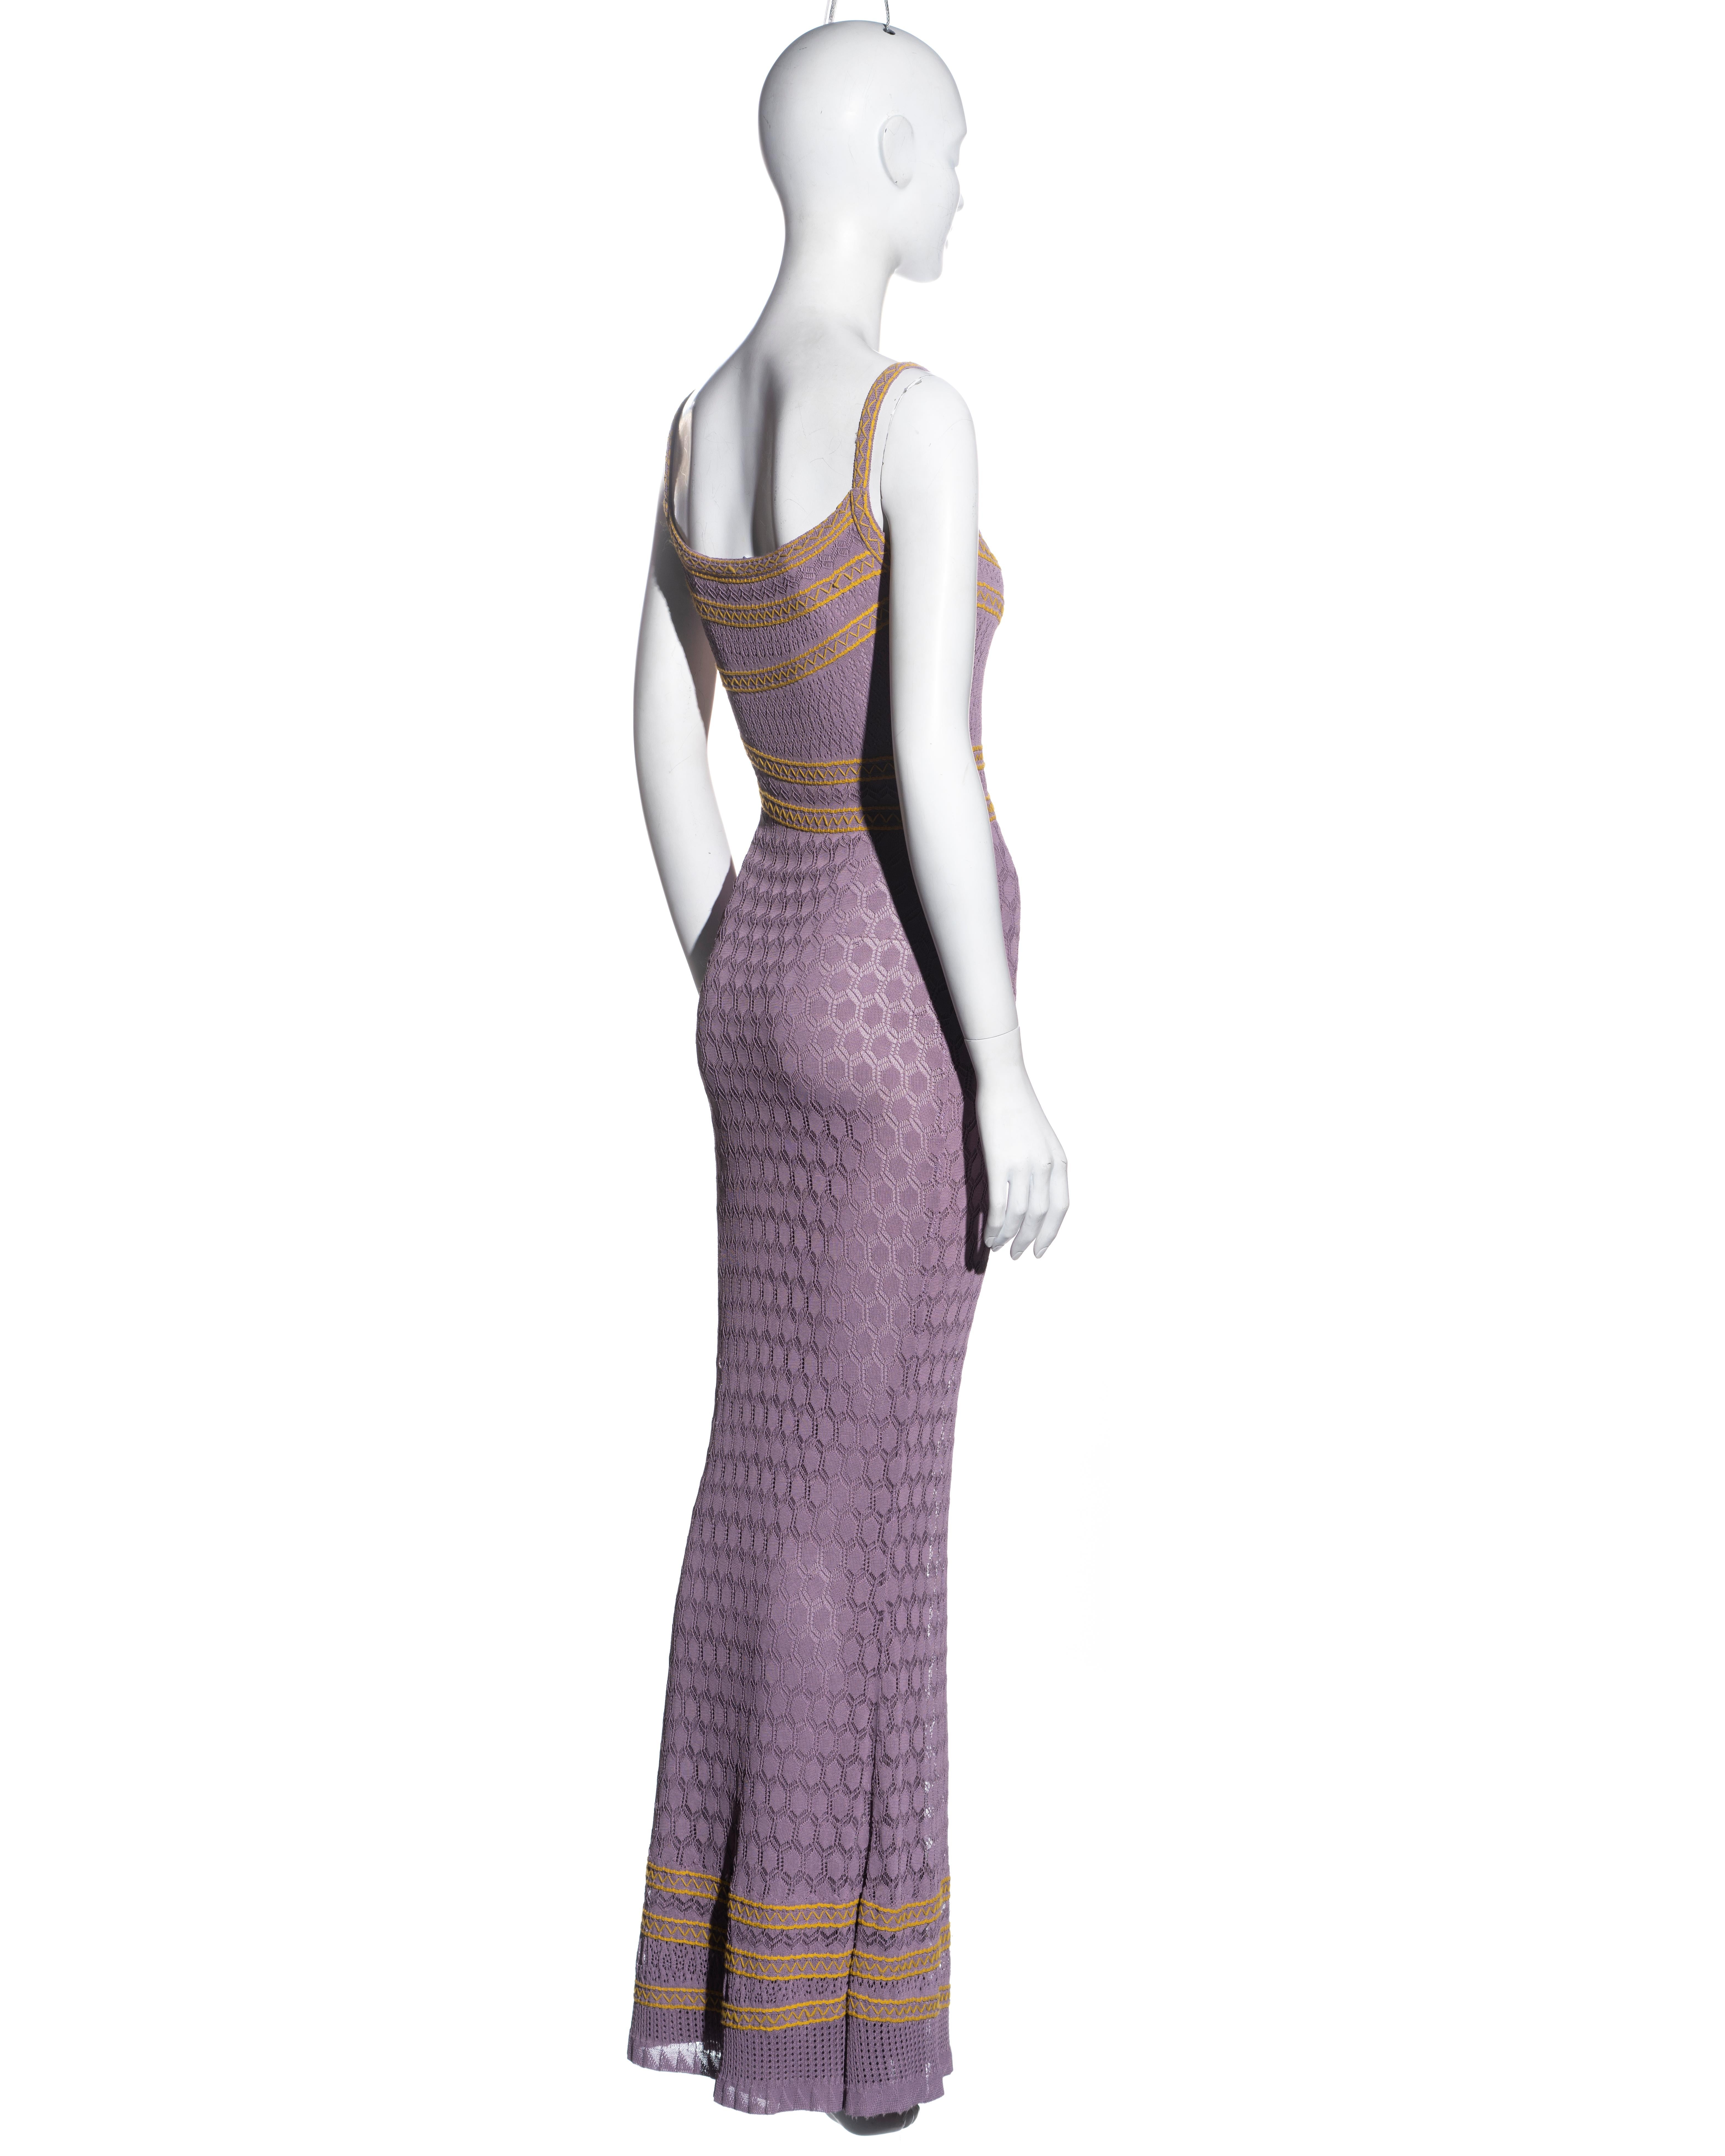 Christian Dior by John Galliano lavender crochet lace maxi dress, ss 2000 For Sale 1